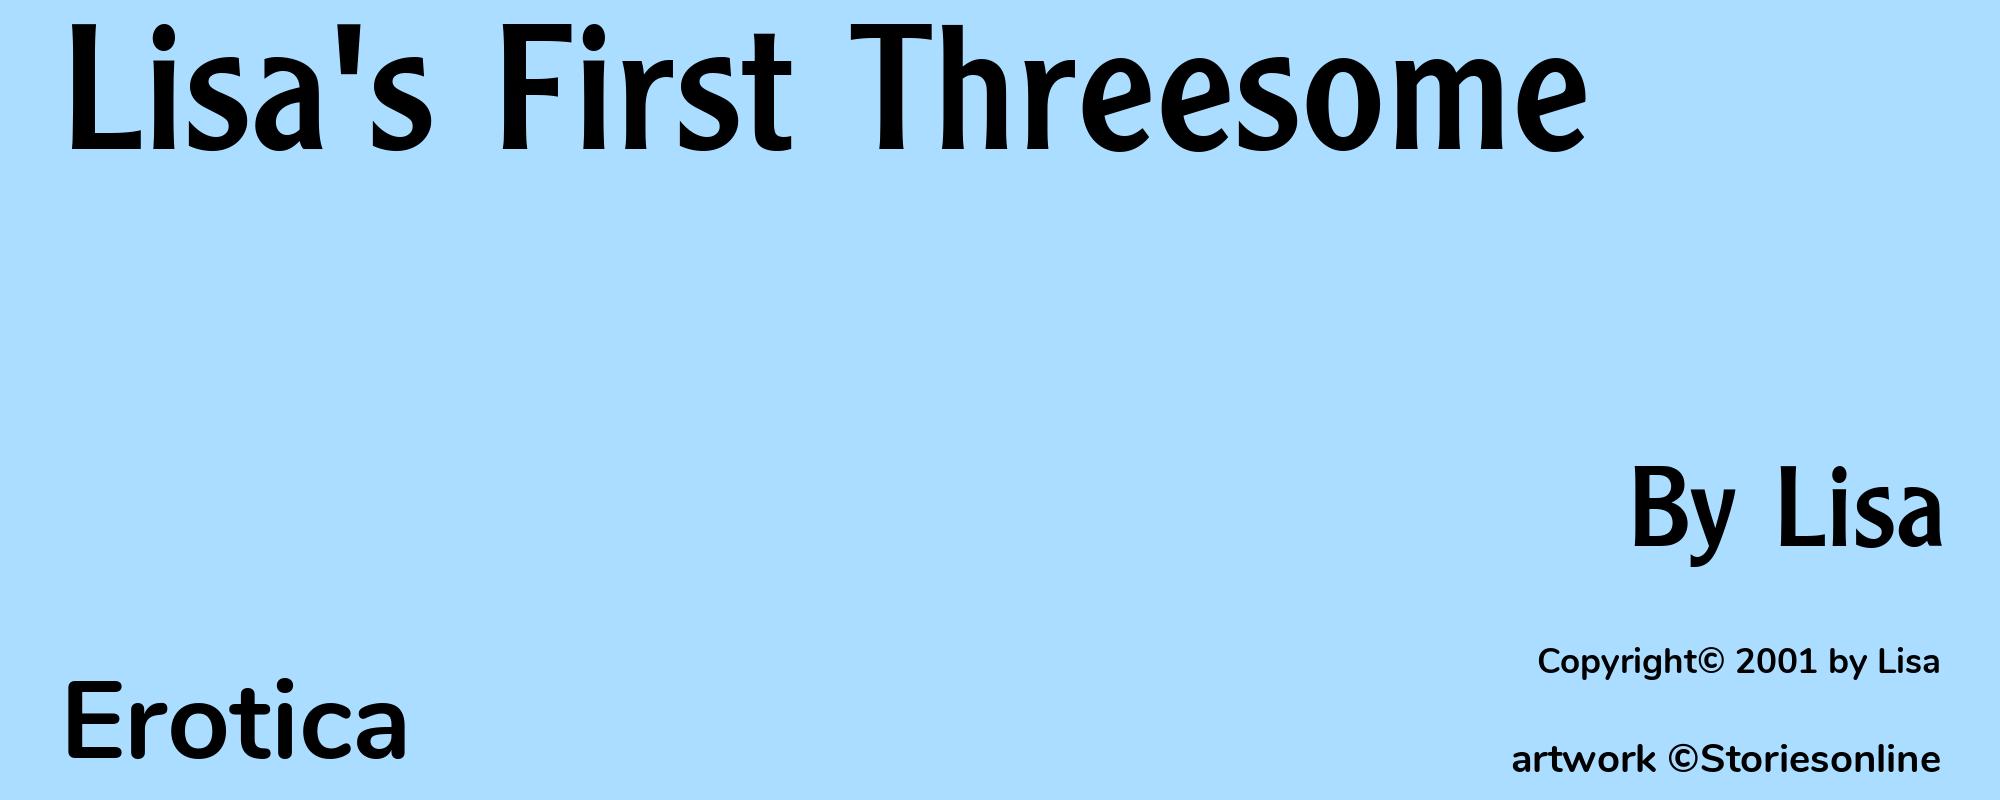 Lisa's First Threesome - Cover